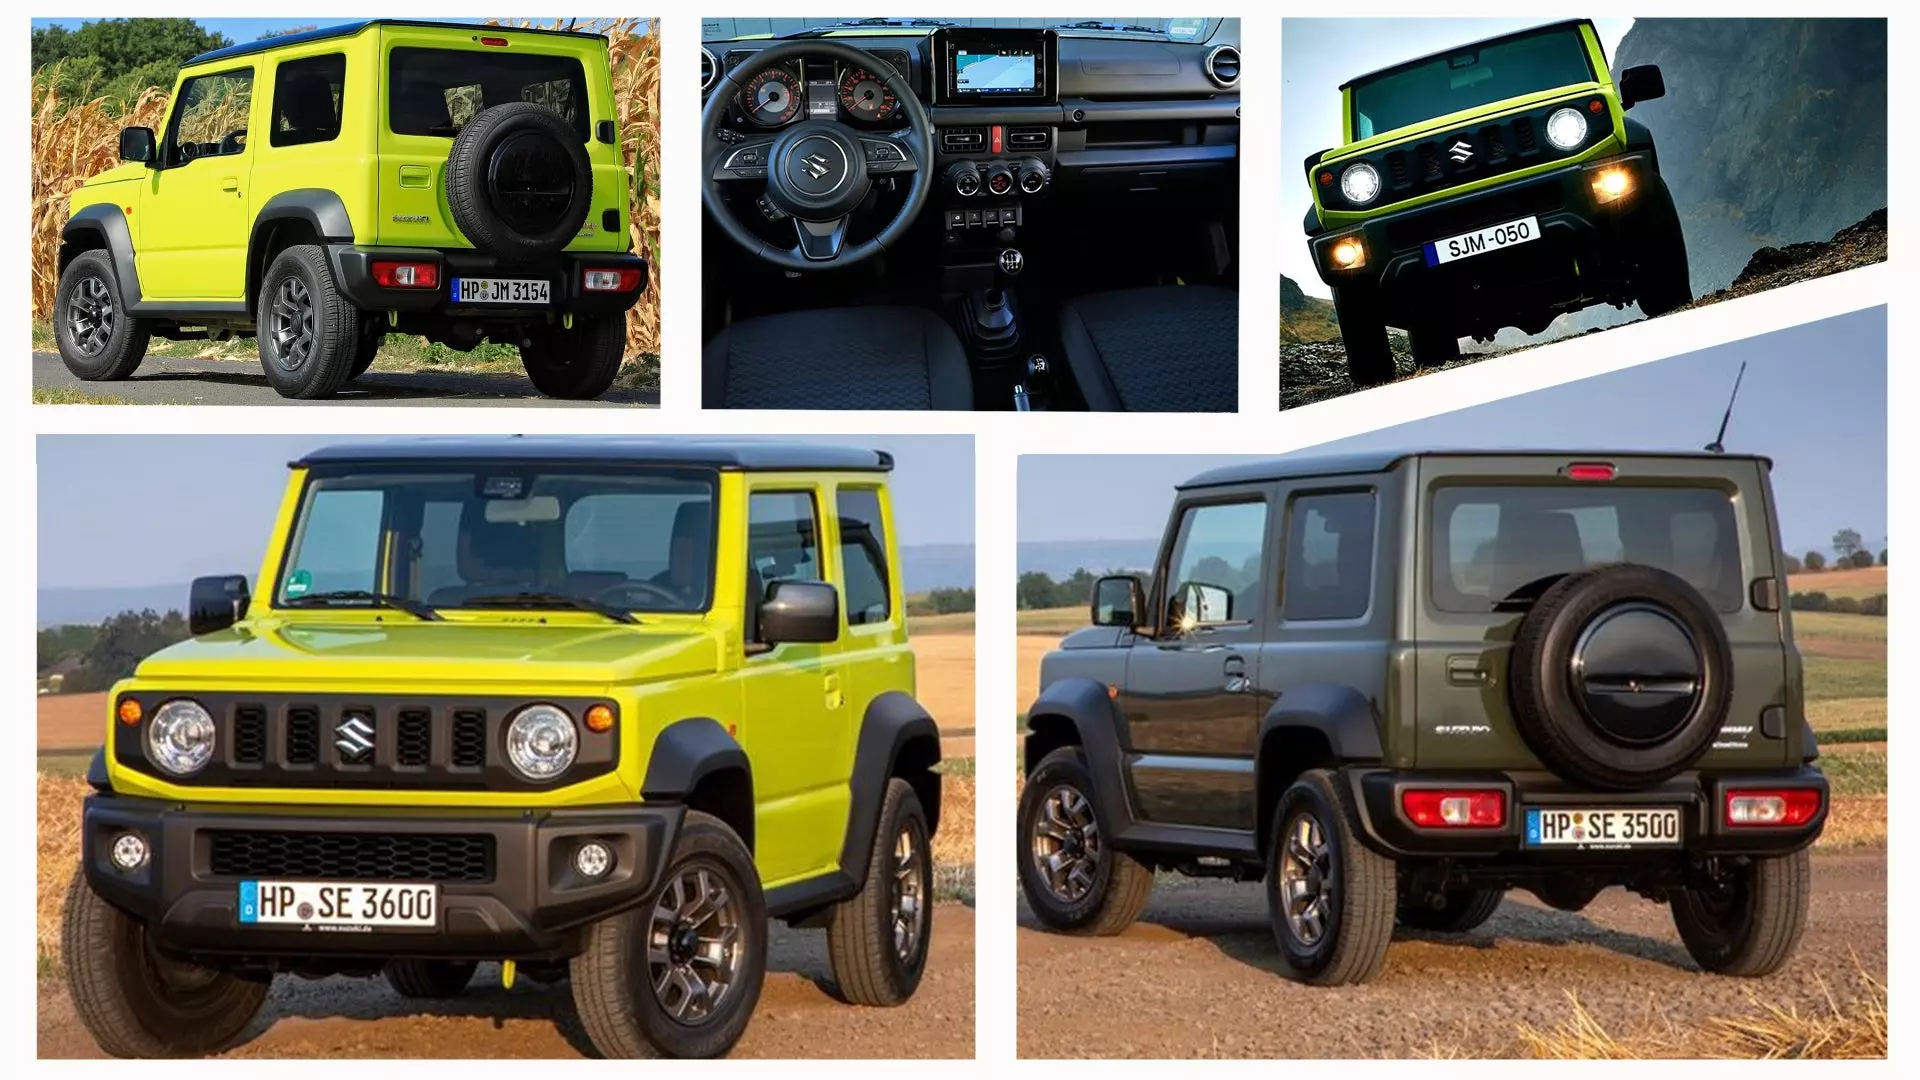 It Pains Me To Say It, But Stop Yearning For the Suzuki Jimny | Autance